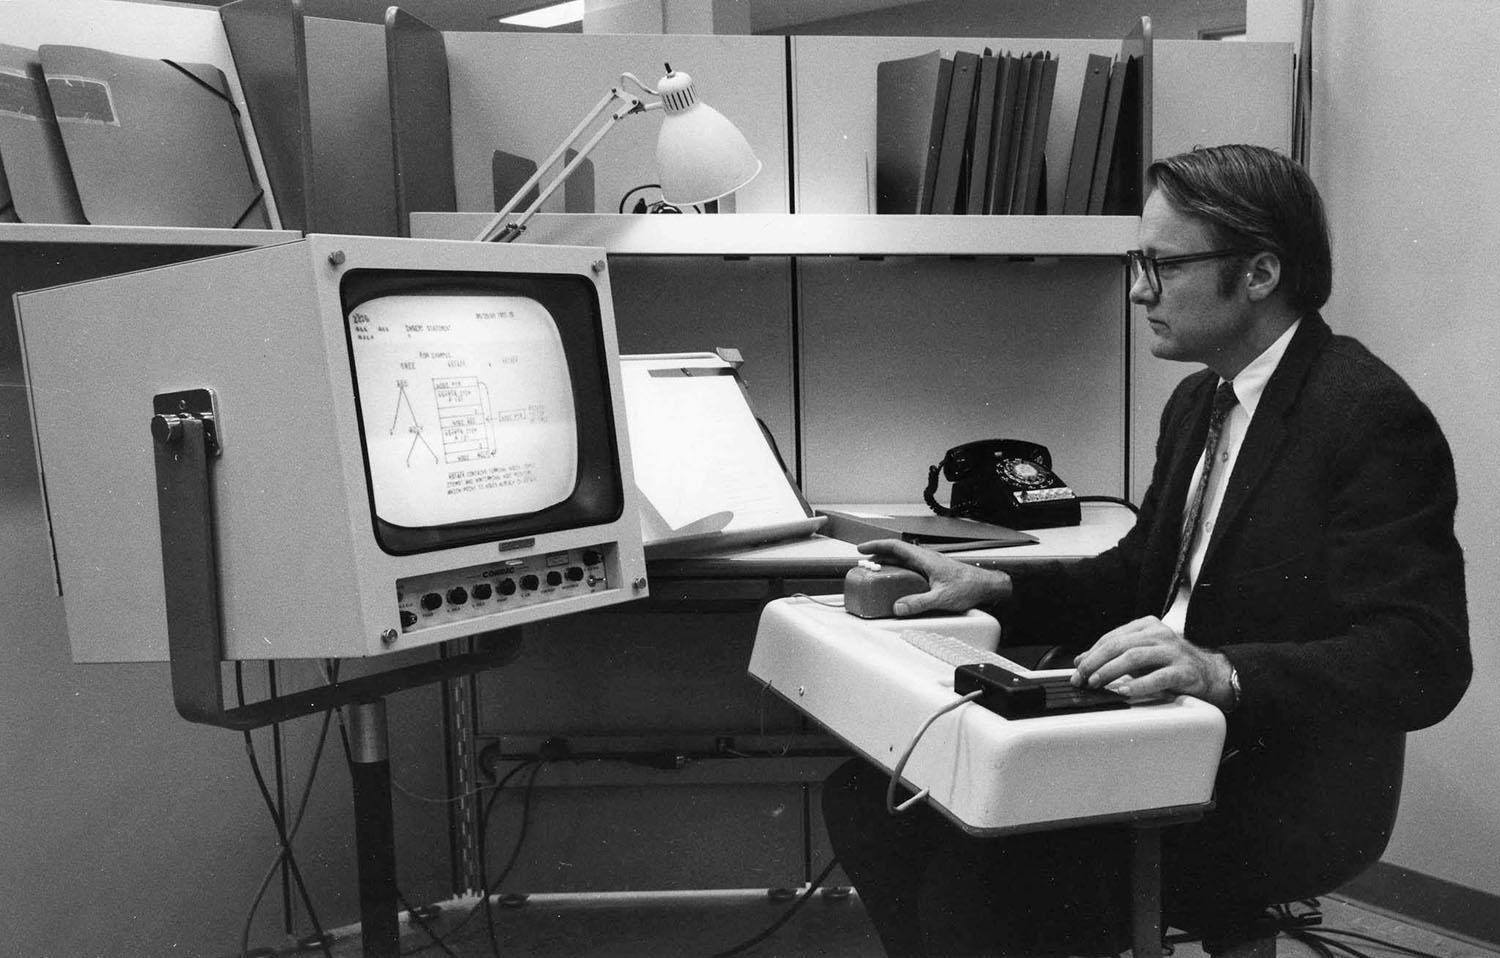 A man interfacing with an old computer